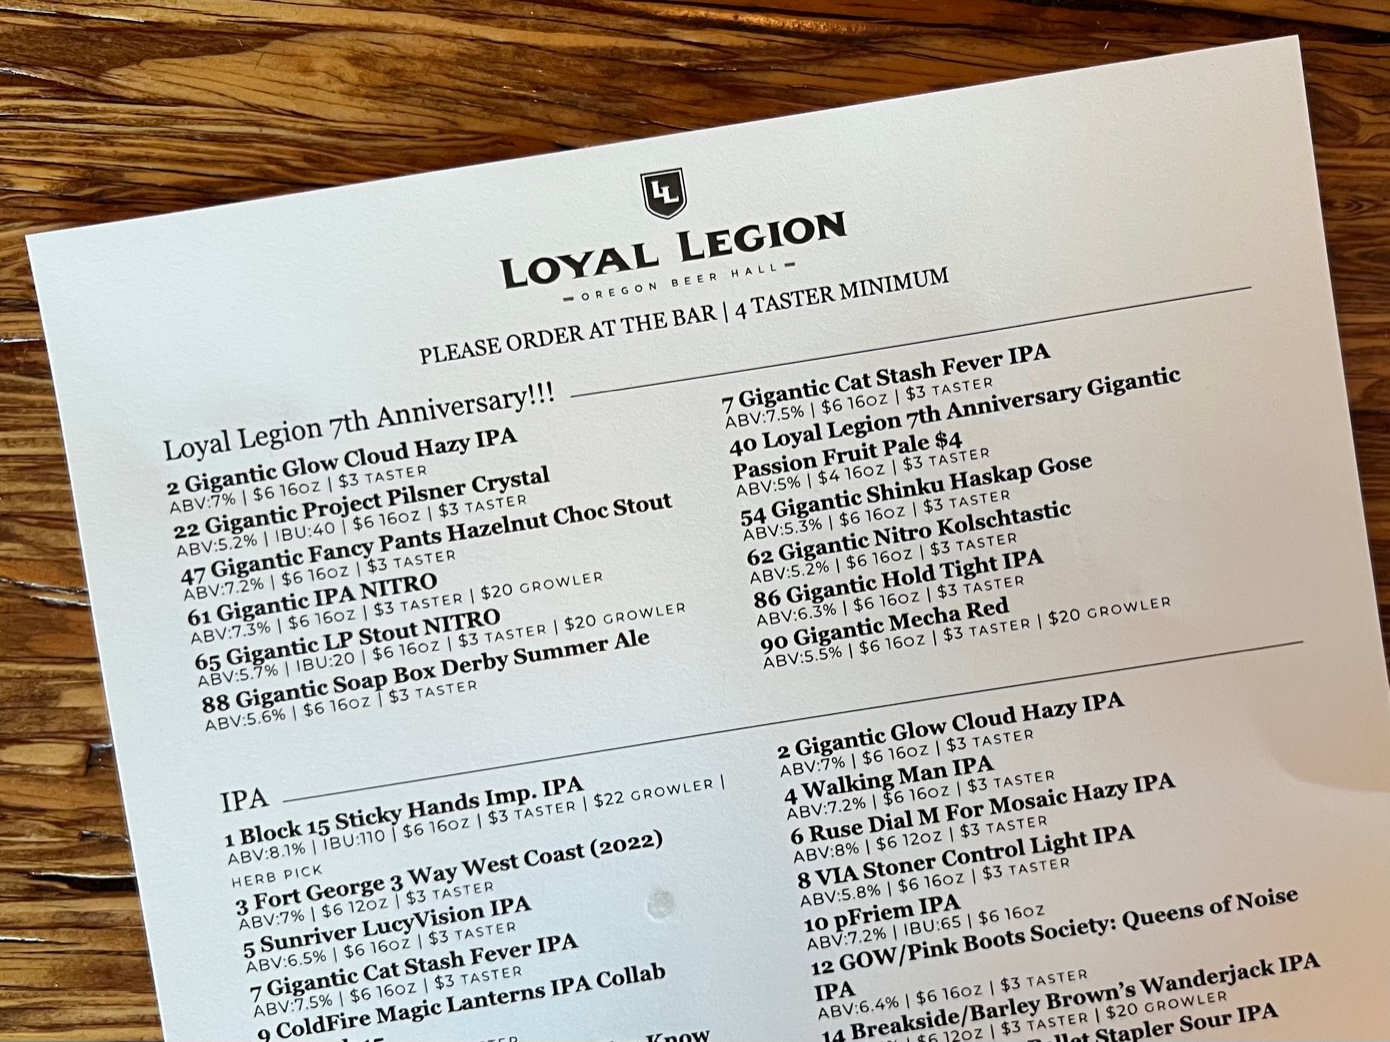 Loyal Legion 7th Anniversary with a Gigantic Brewing takeover and 7th Anniversary Passionfruit Pale.